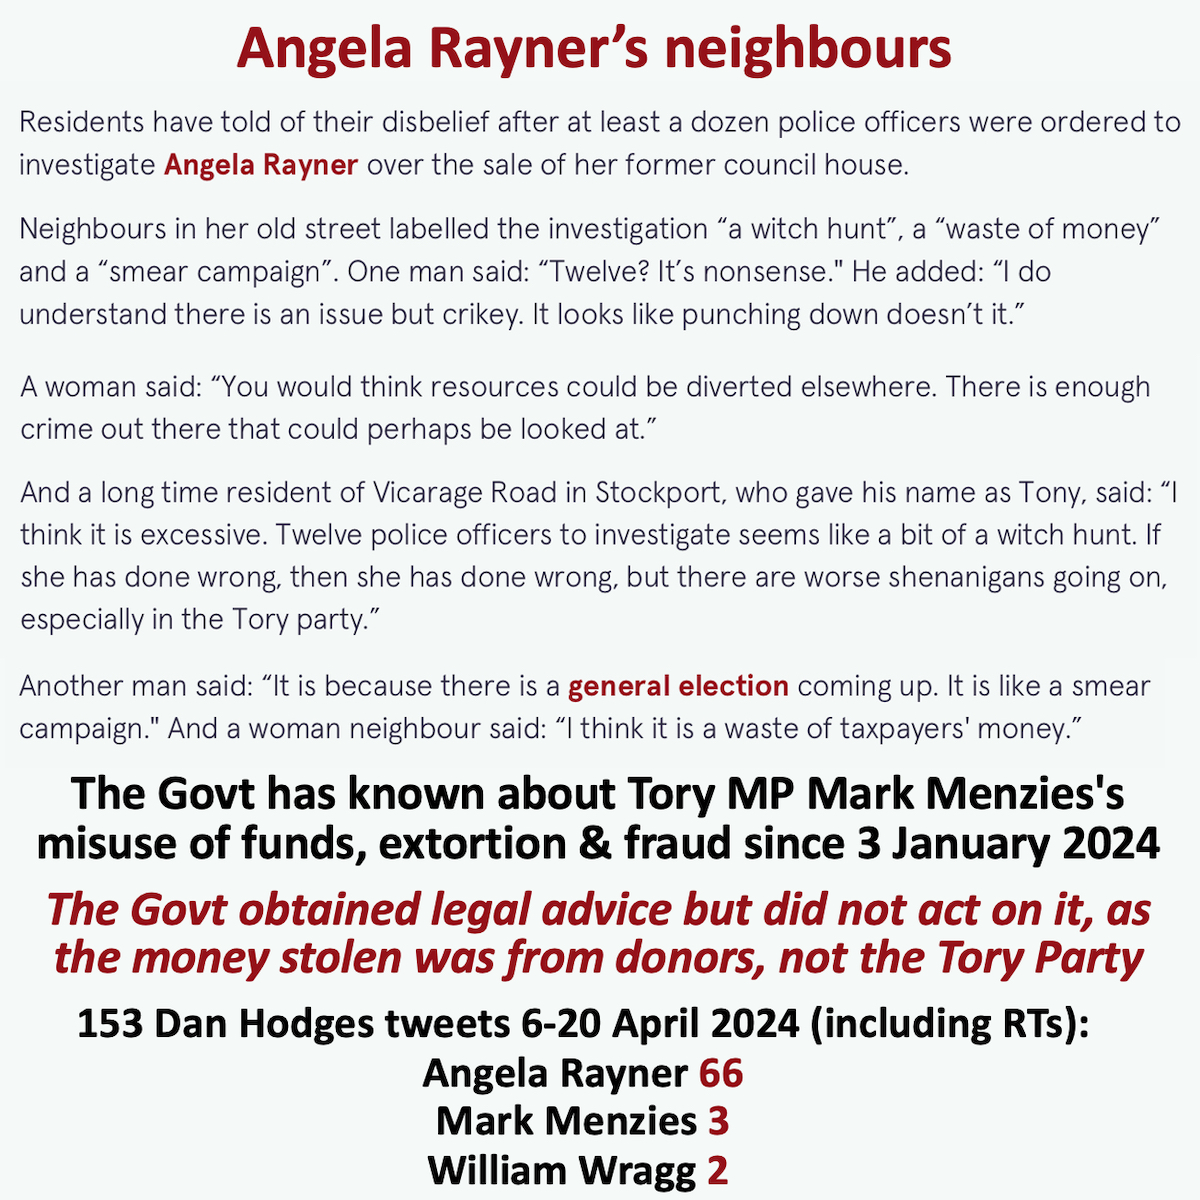 @DPJHodges What, like these #AngelaRayner Neighbours?